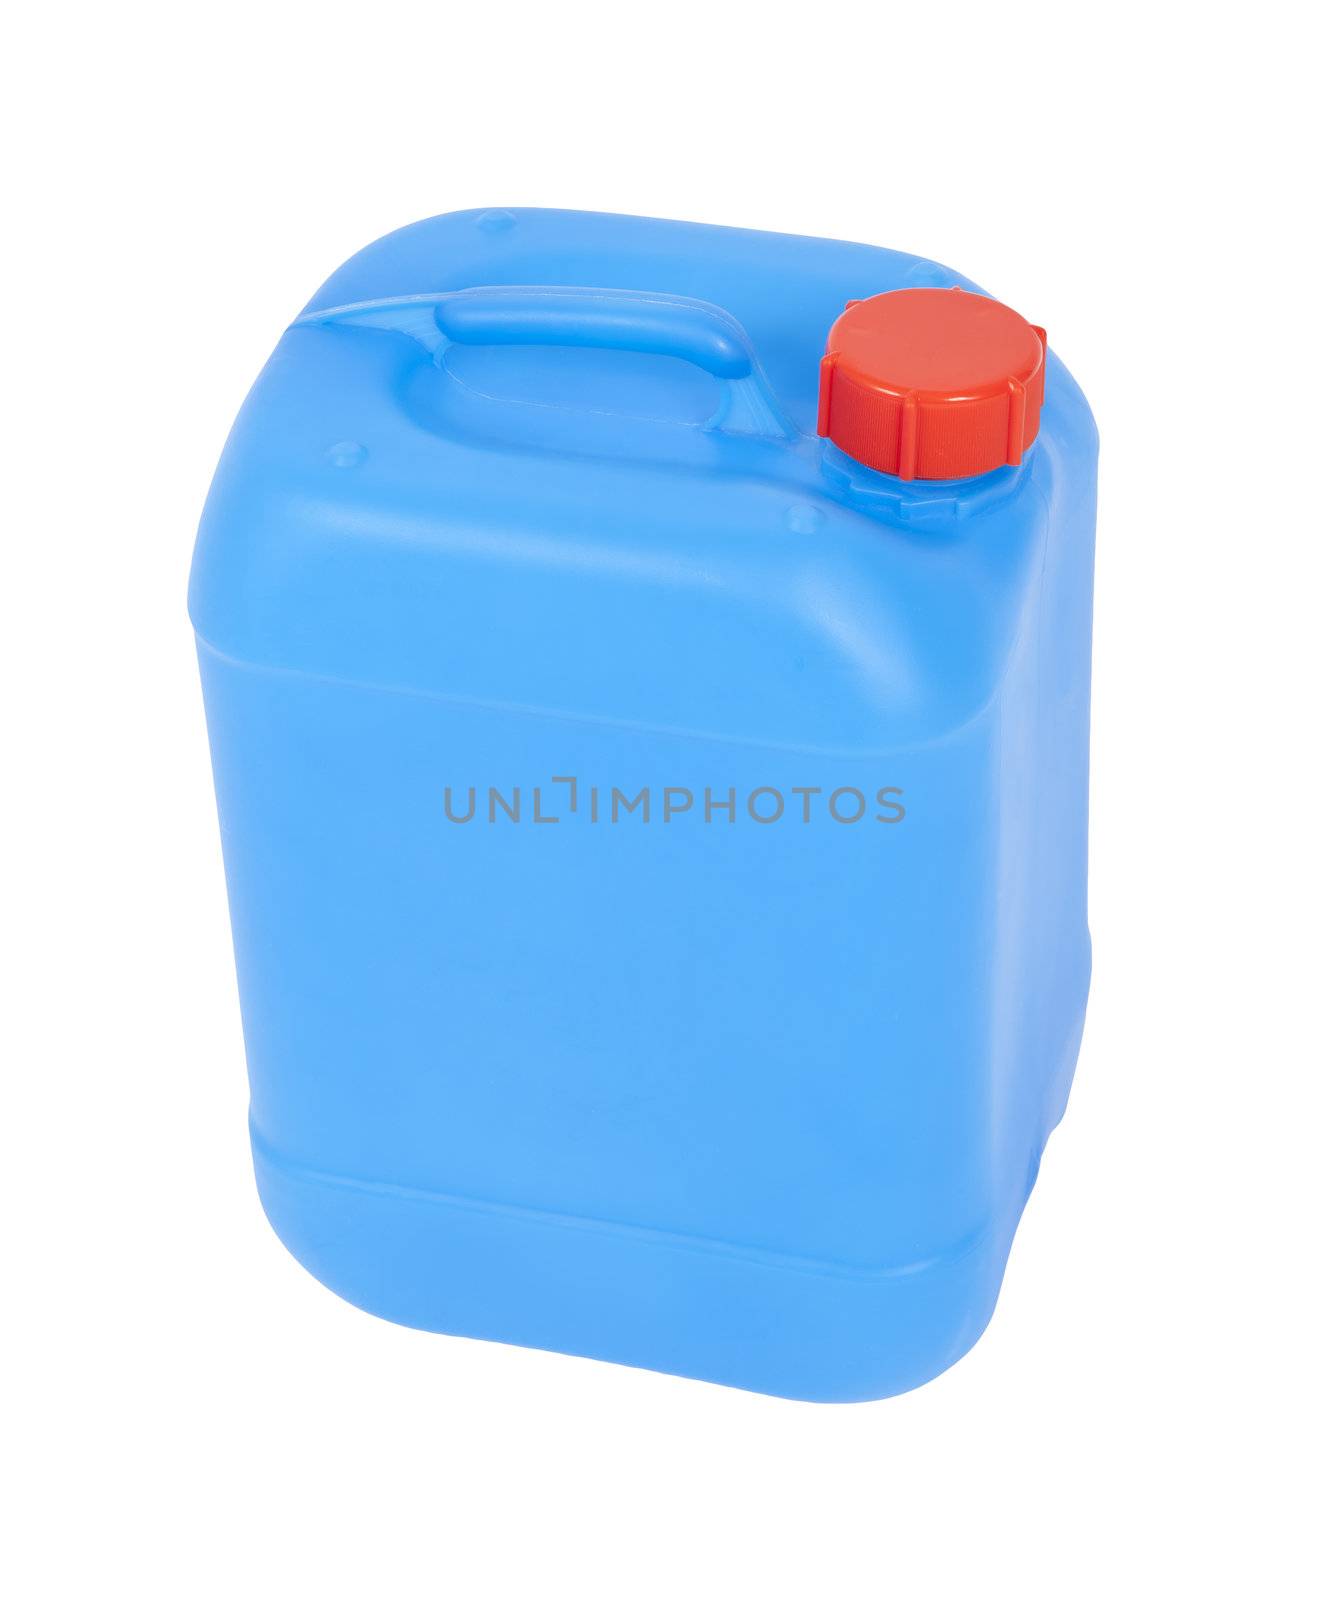 An image of a nice blue canister